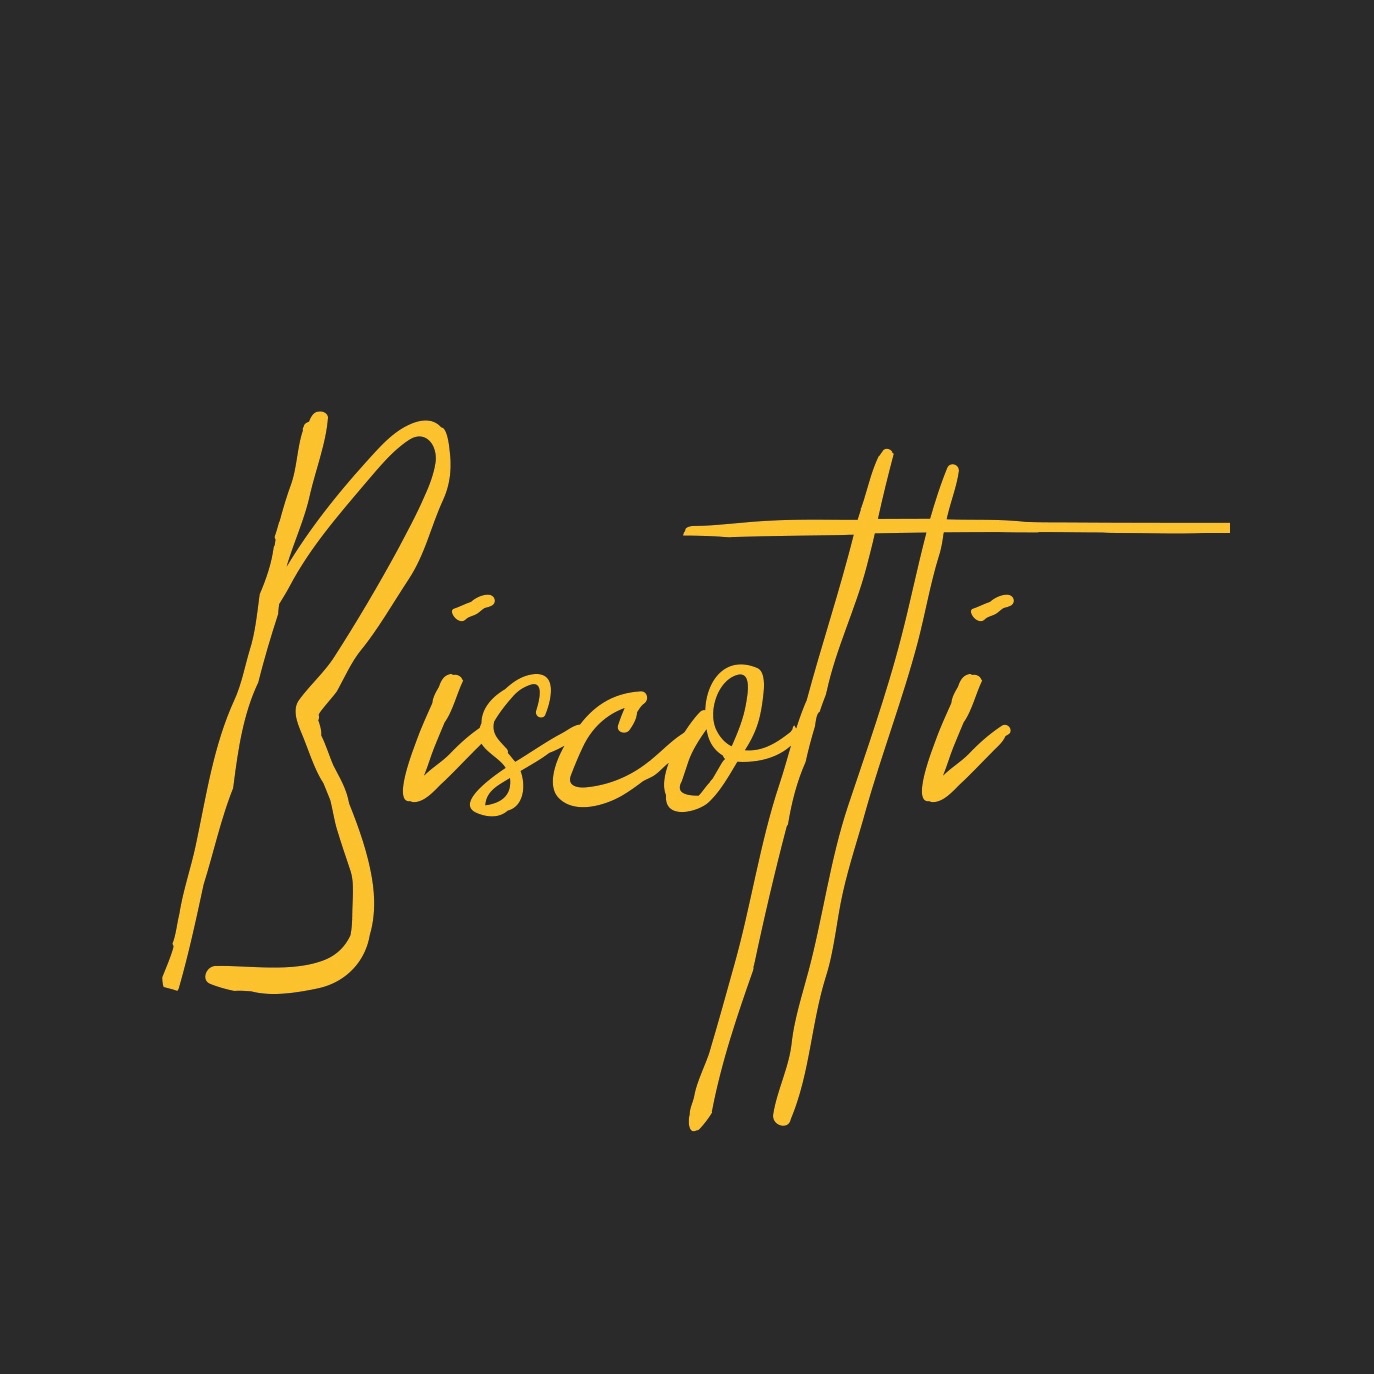 Buy Any Biscotti Product, Get a Biscotti Concentrate for $1